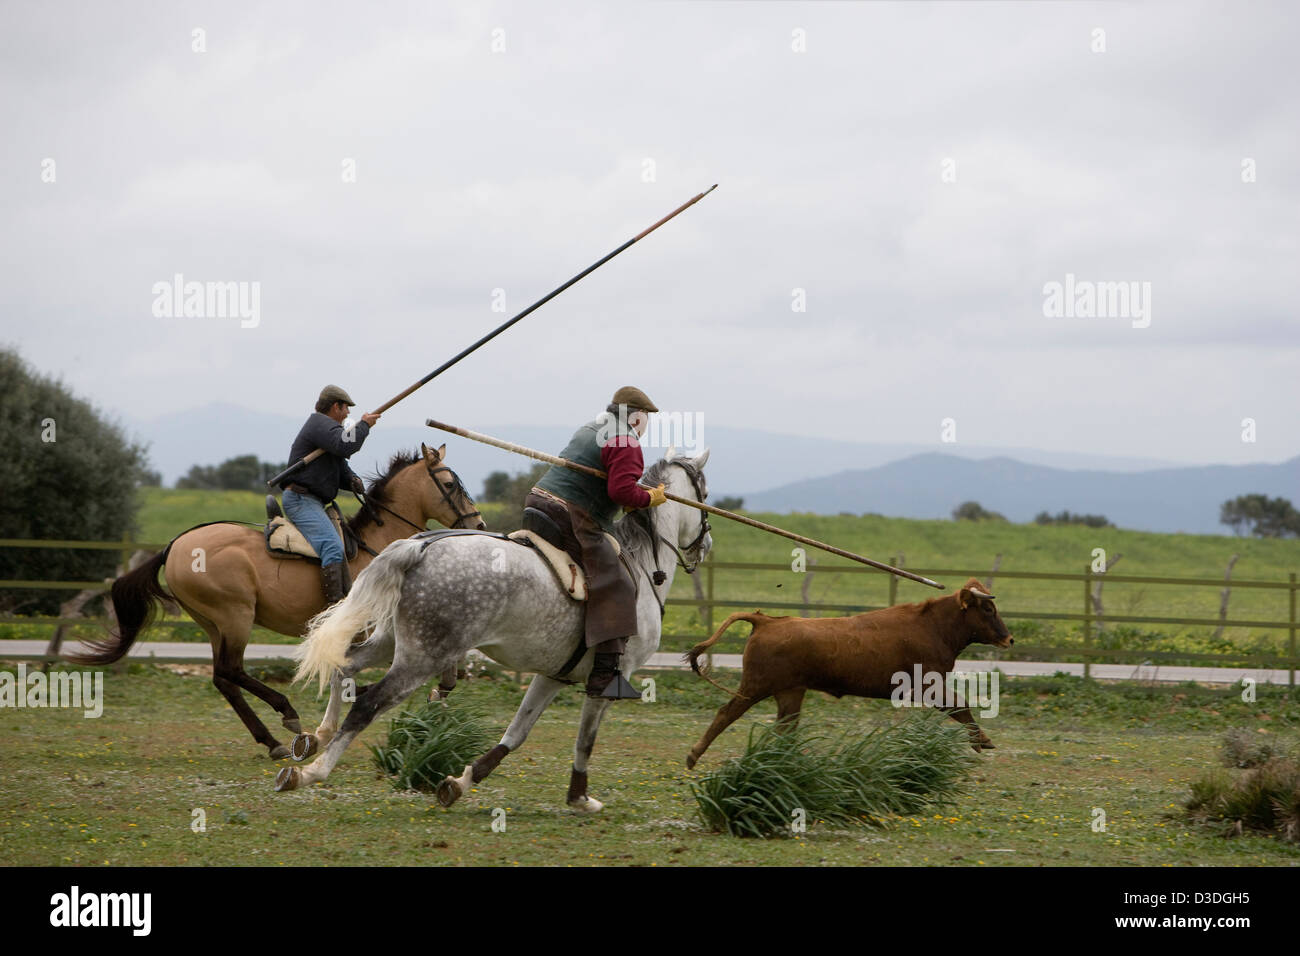 JEREZ DE LA FRONTERA,  SPAIN, 22nd FEBRUARY 2008:  Alvaro Domecq, 67, (centre)  an accomplished rejoneador or bullfighter on horseback in his youth, holds a traditional garrocha, a 2.5 meters long wooden spear as he and a colleague chase a a two year old cow at a 'Acorso y Derribo' event on one of his farms.  Here riders tests young cows for their agression and train horses for the specialised dressage they need to be able to dance around fully grown four year old bulls in the bullring. Stock Photo